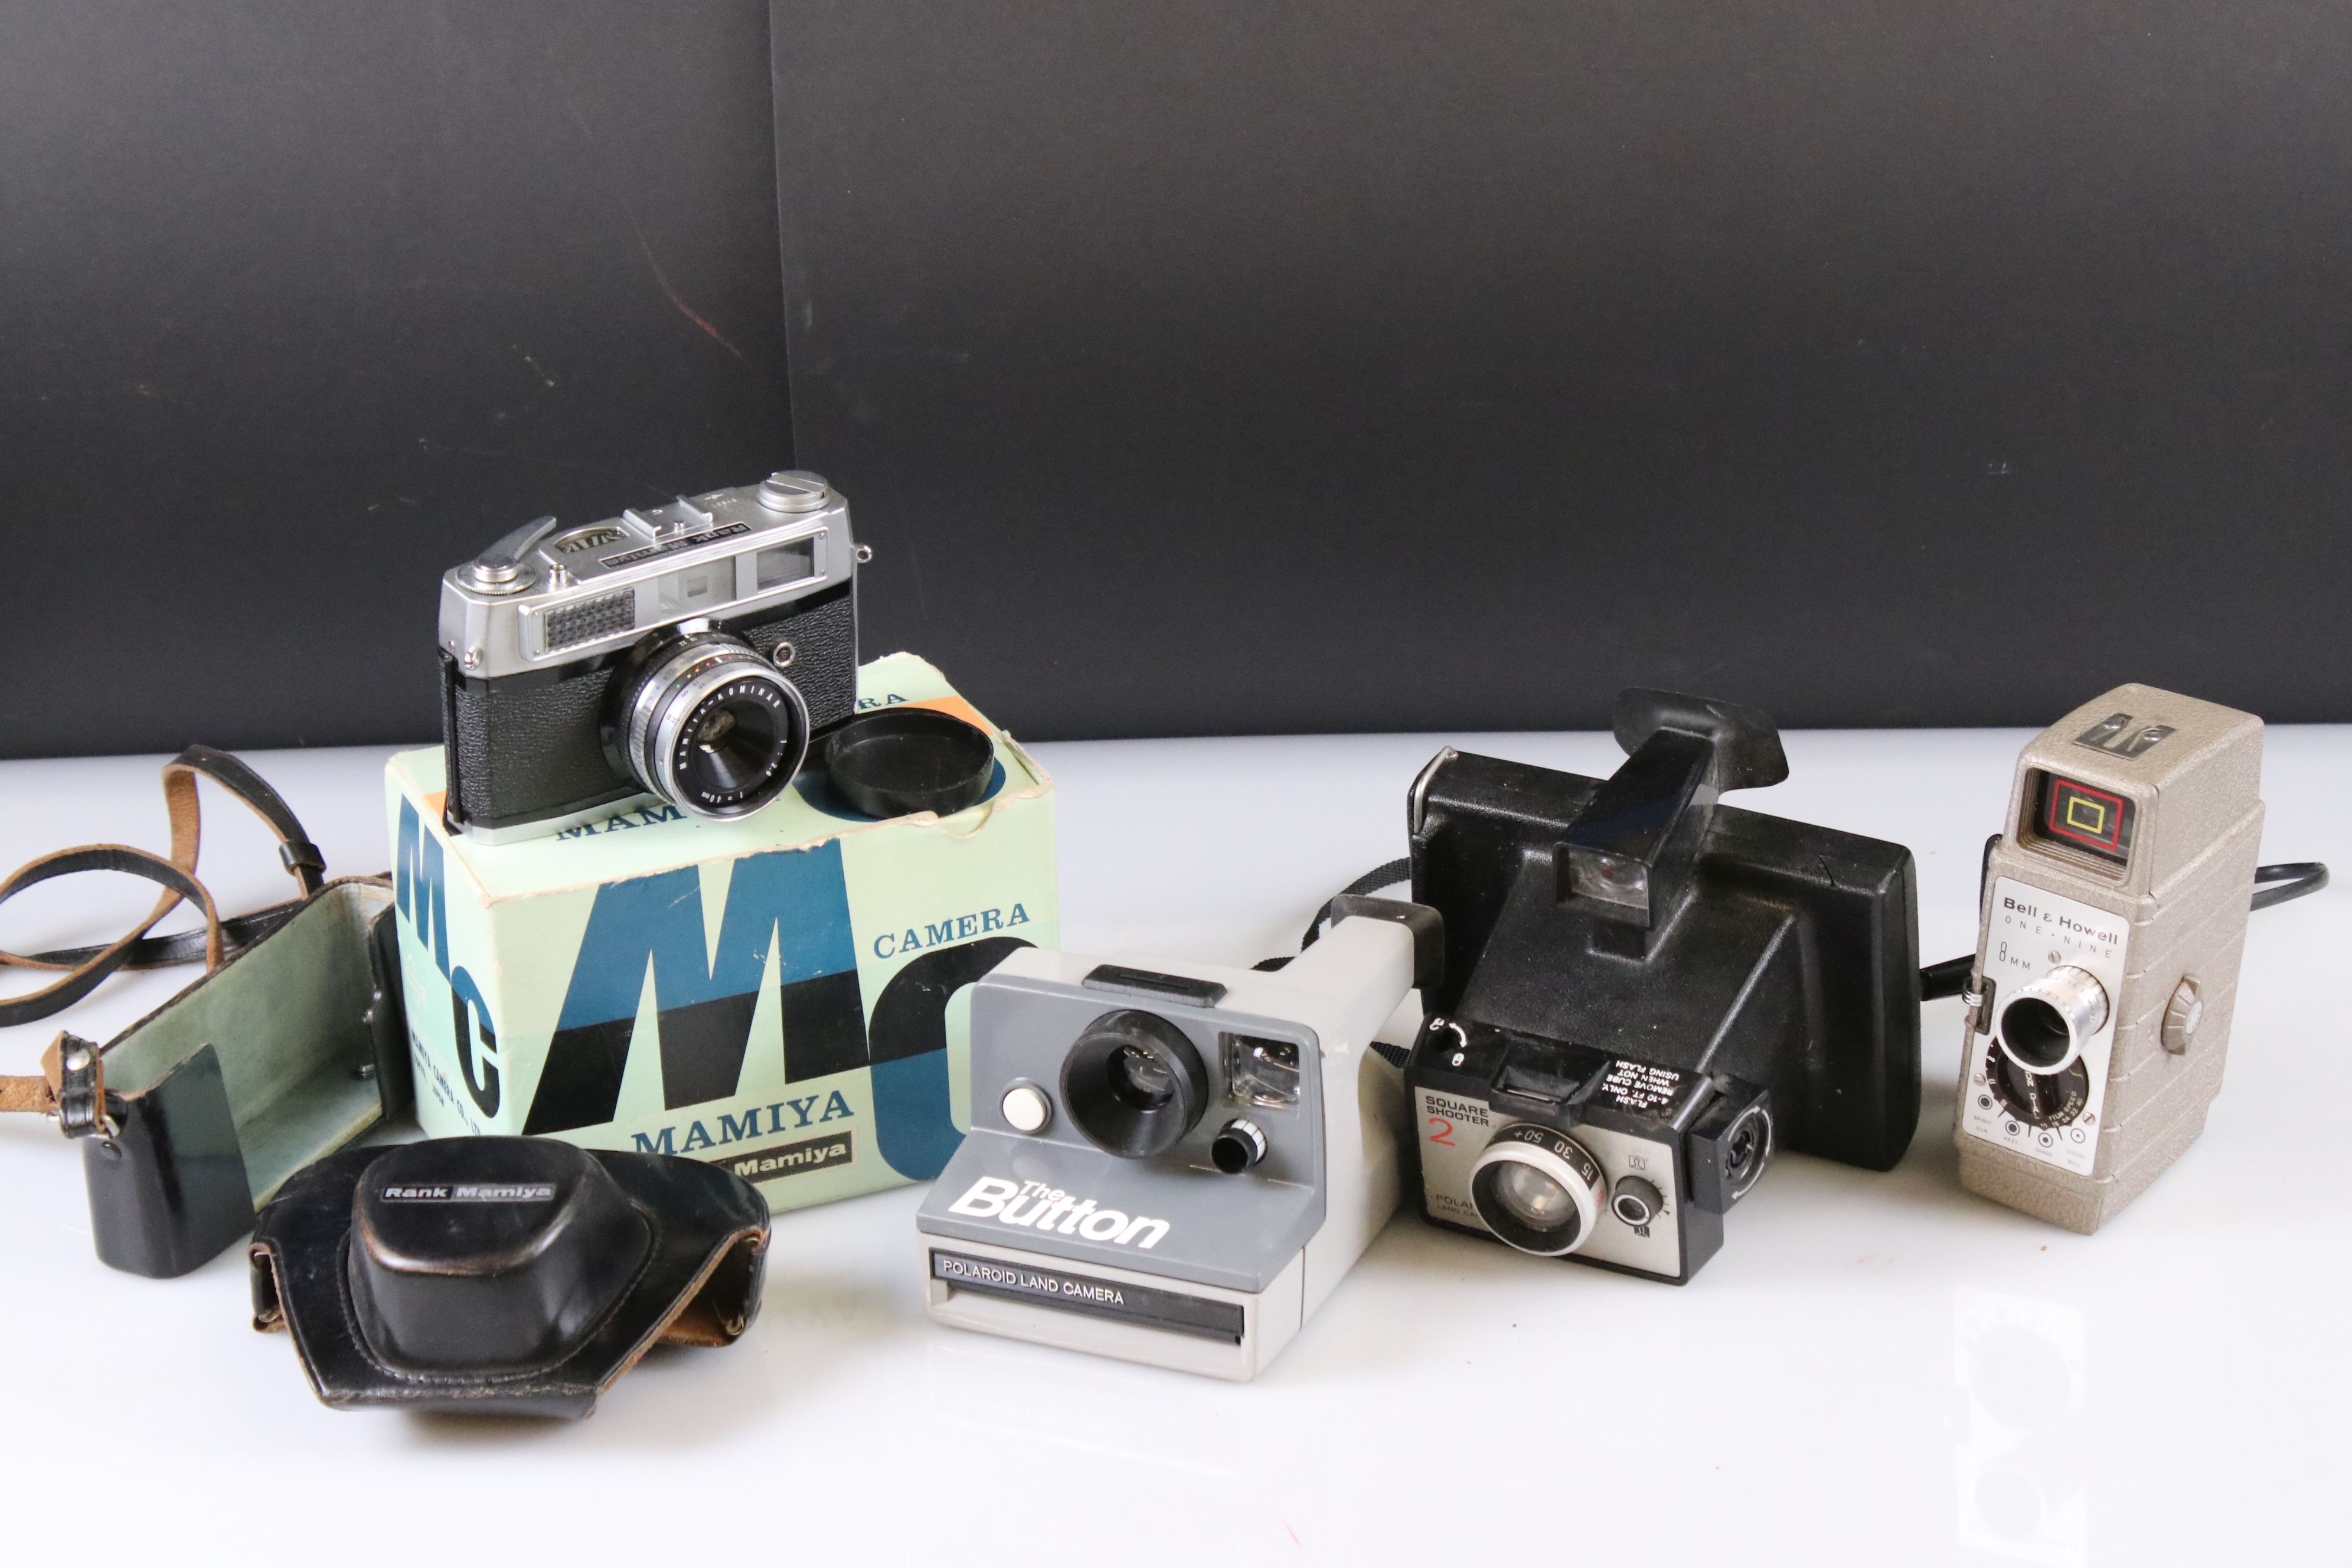 A small collection of vintage cameras to include Polaroid and Bell & Howell examples.